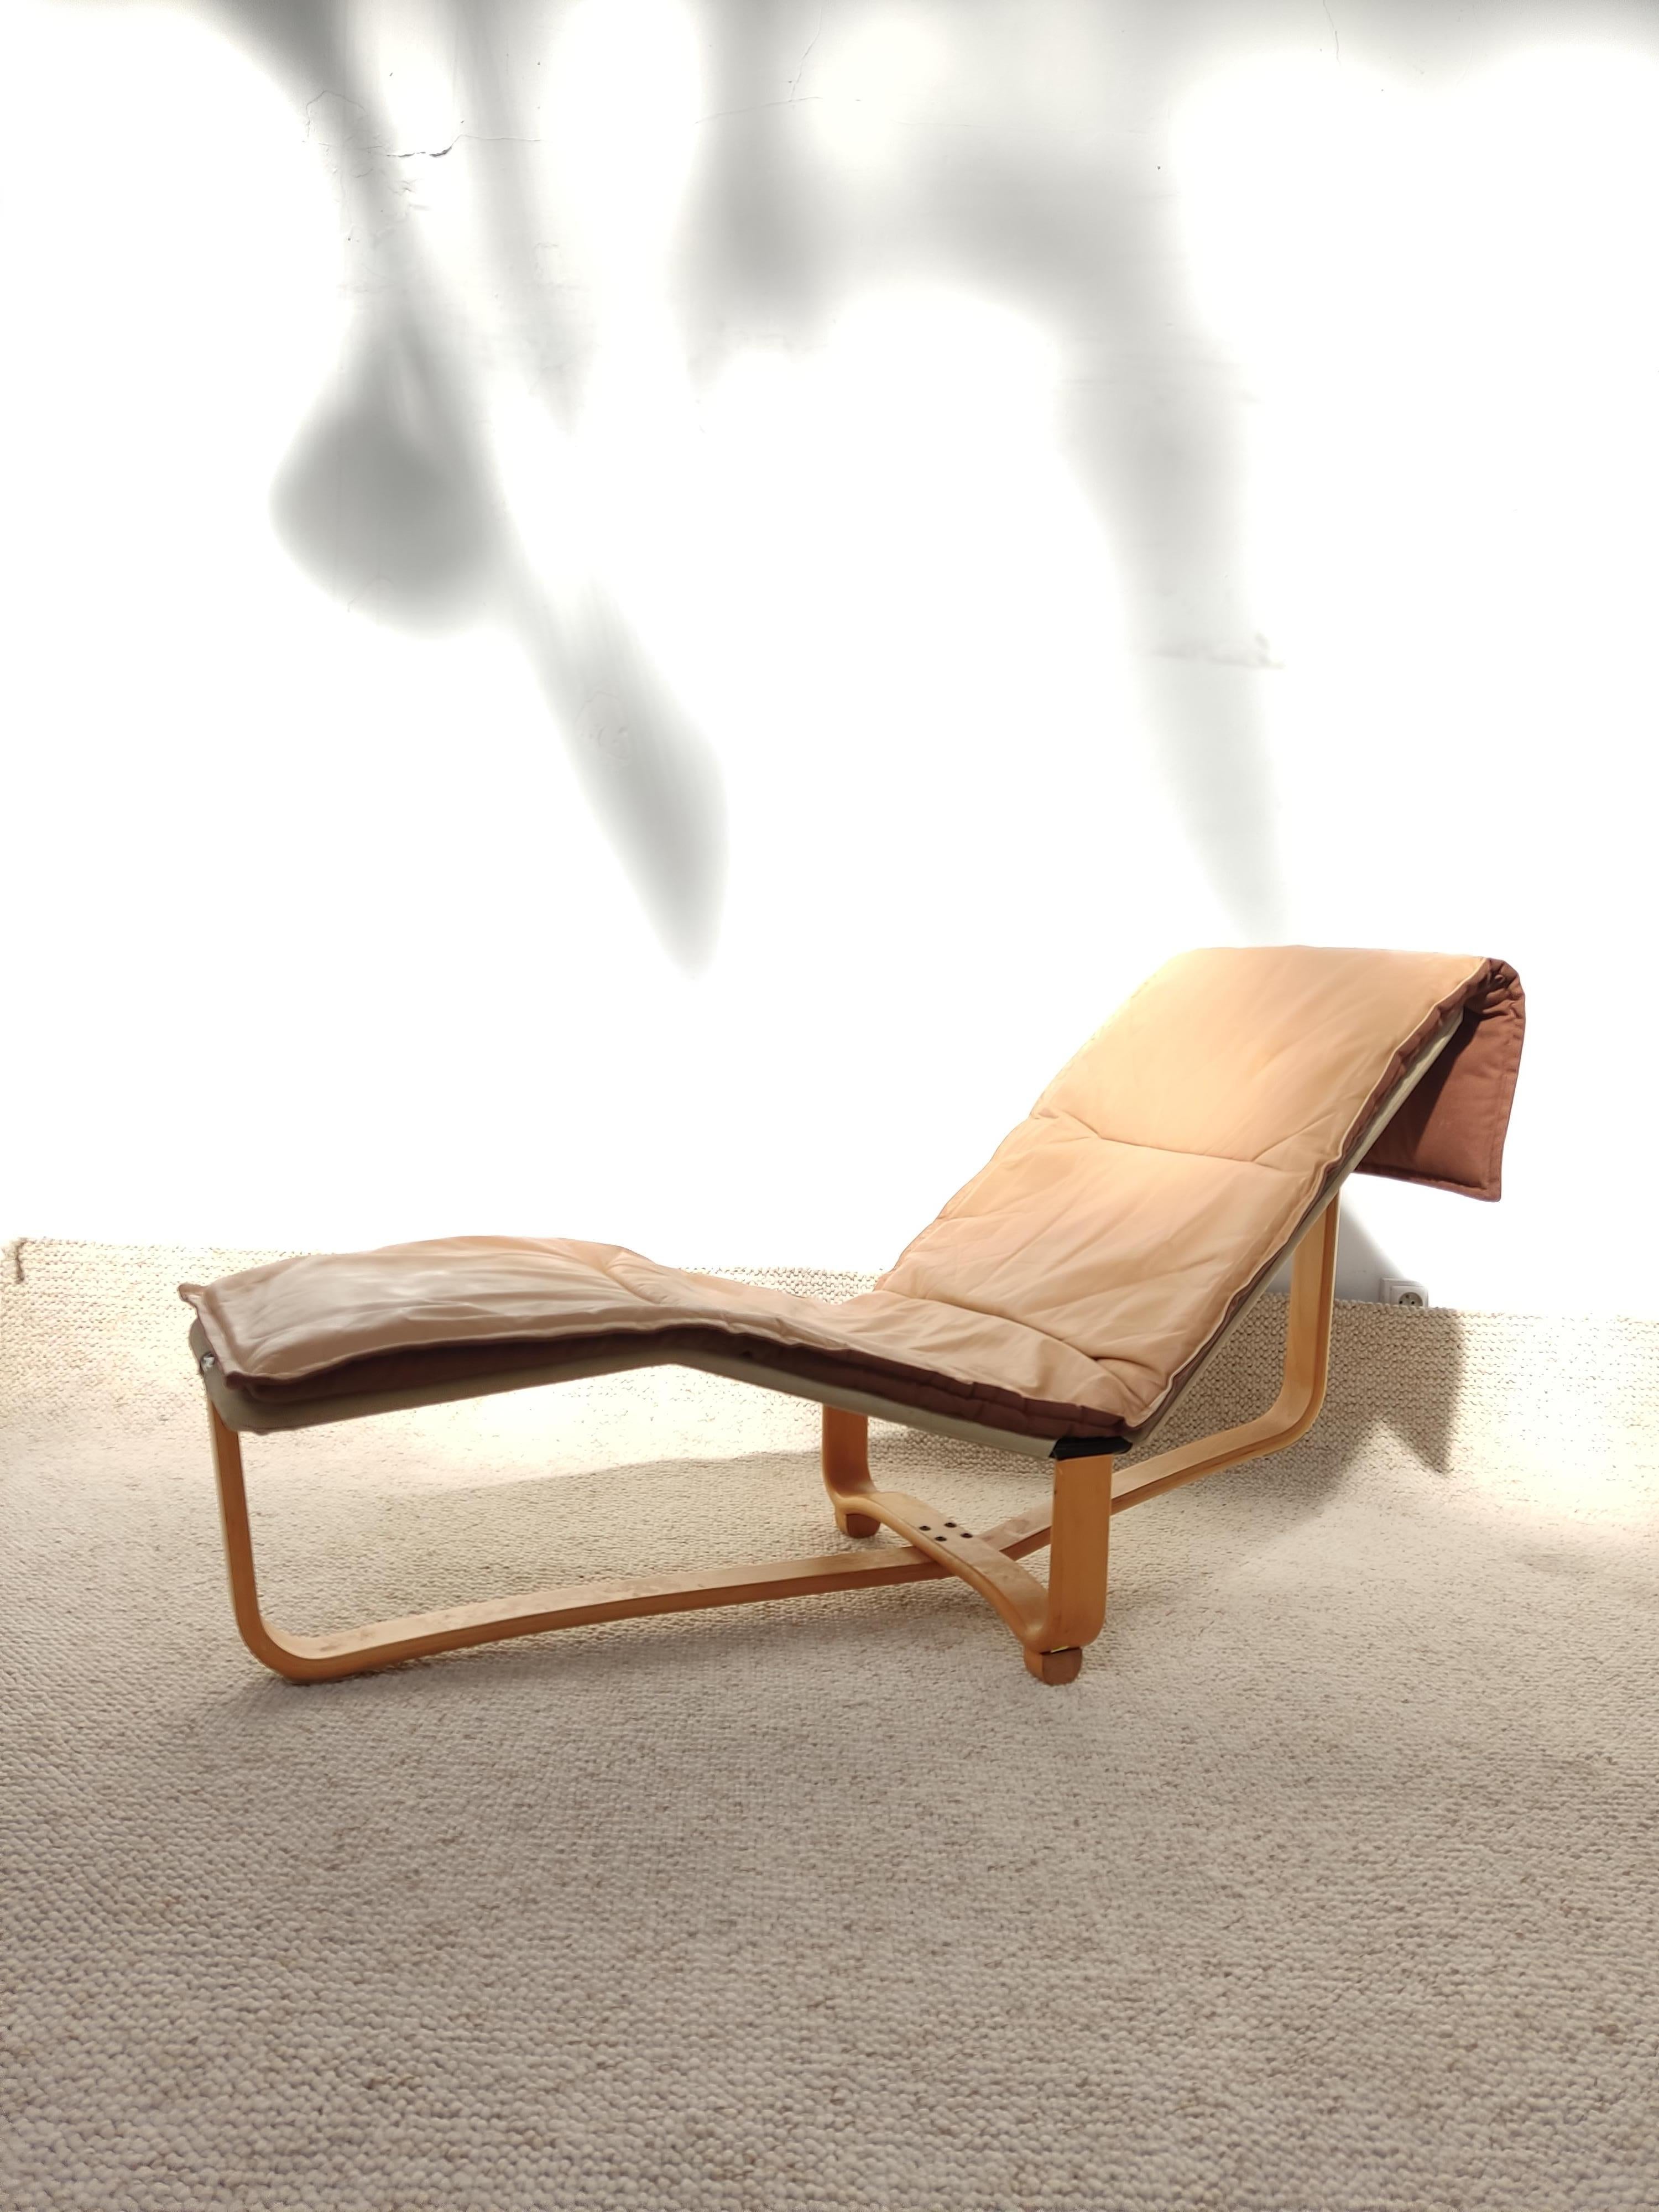 Ingmar (1920-2002) & Knut Relling (XX-XXème) 
Chaise-longue with plywood structure from which rests a black lacquered metal frame covered with a canvas. Camel leather seat cushion. Label of the editor under the seat.
Edition: Westnofa Furniture,